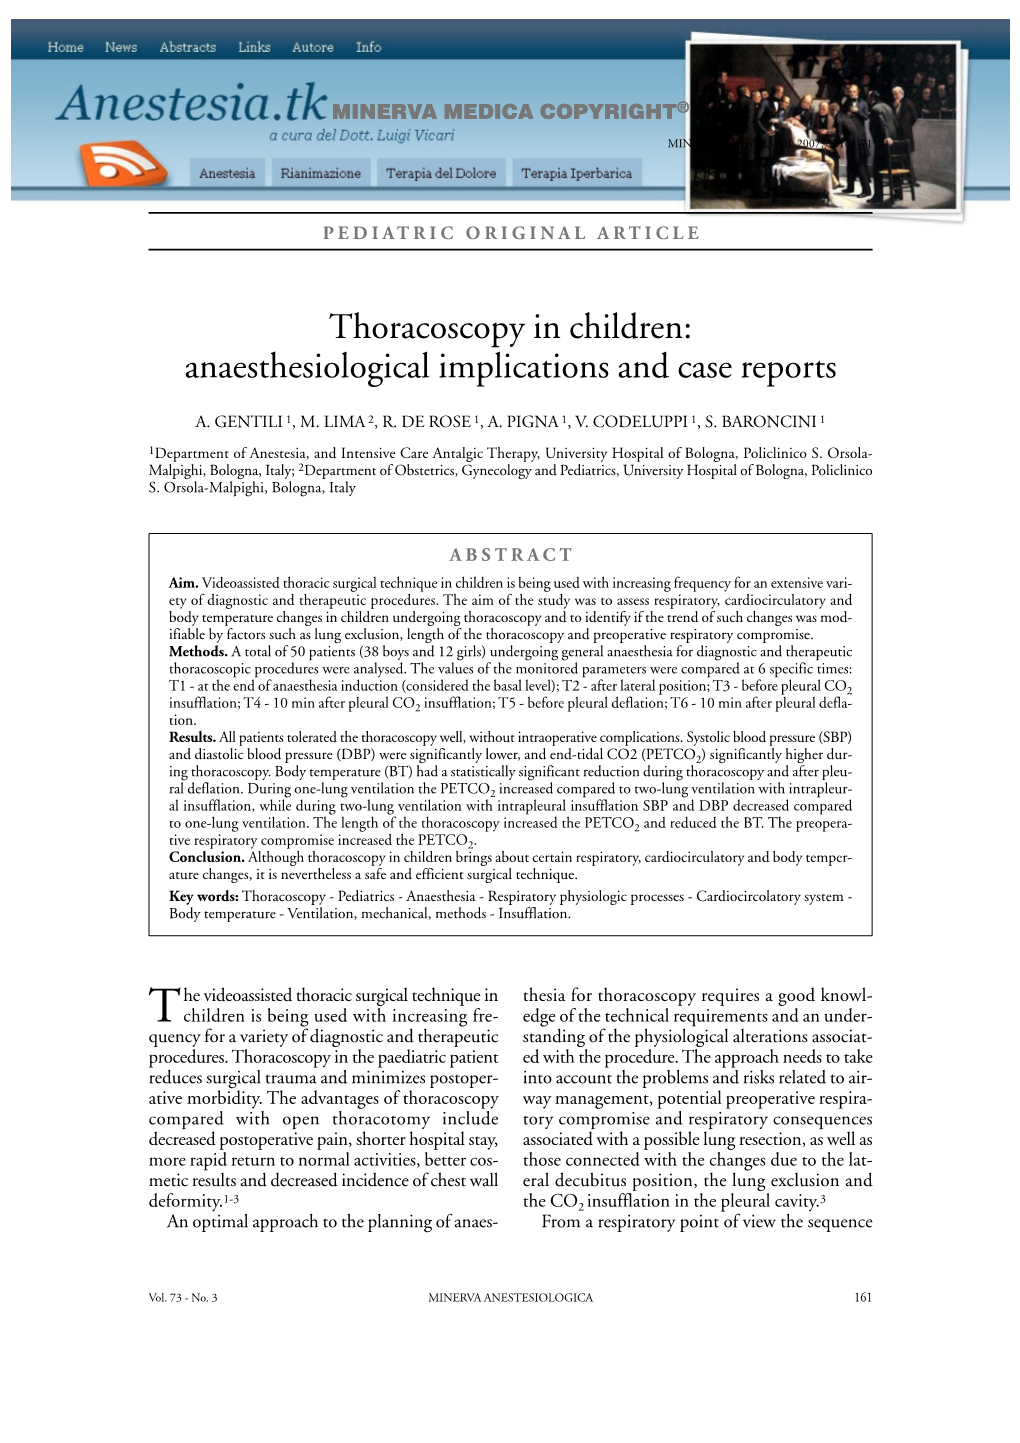 Thoracoscopy in Children: Anaesthesiological Implications and Case Reports